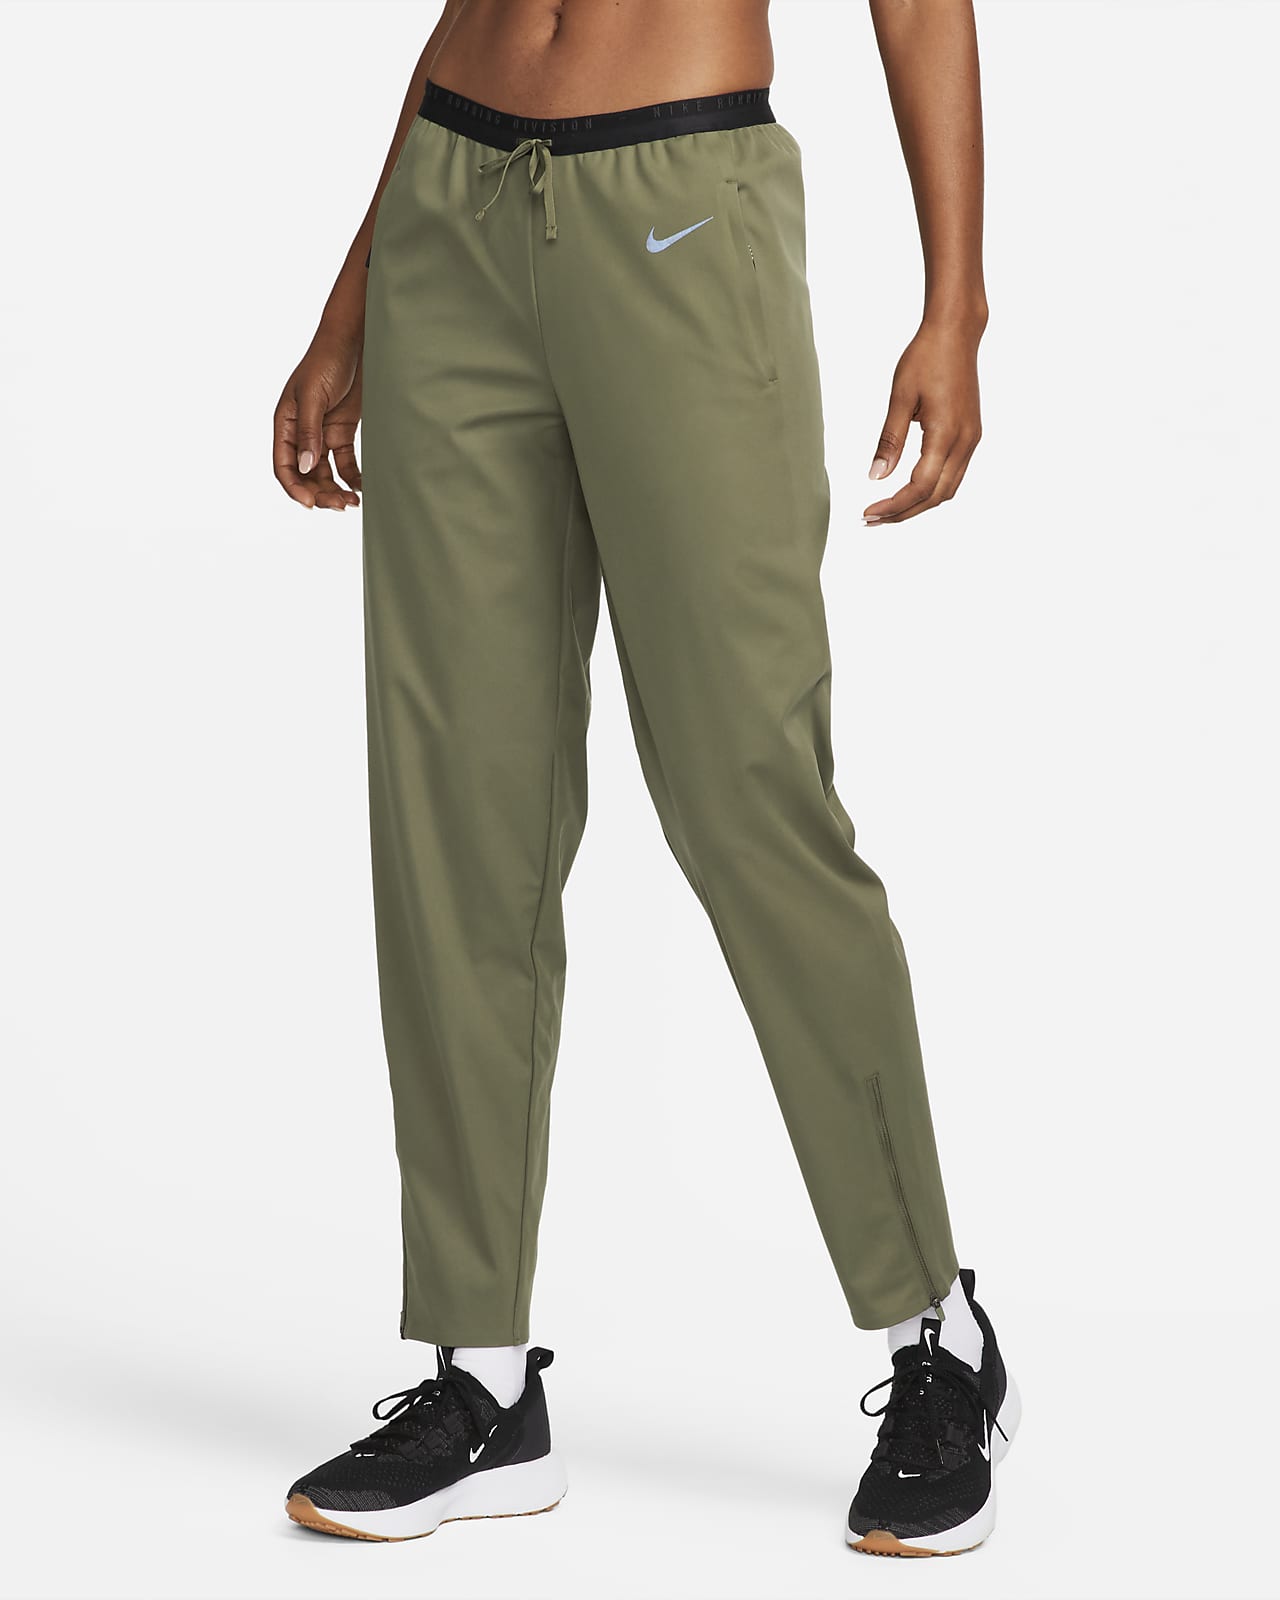 Nike Storm-FIT Run Division Women's Running Trousers